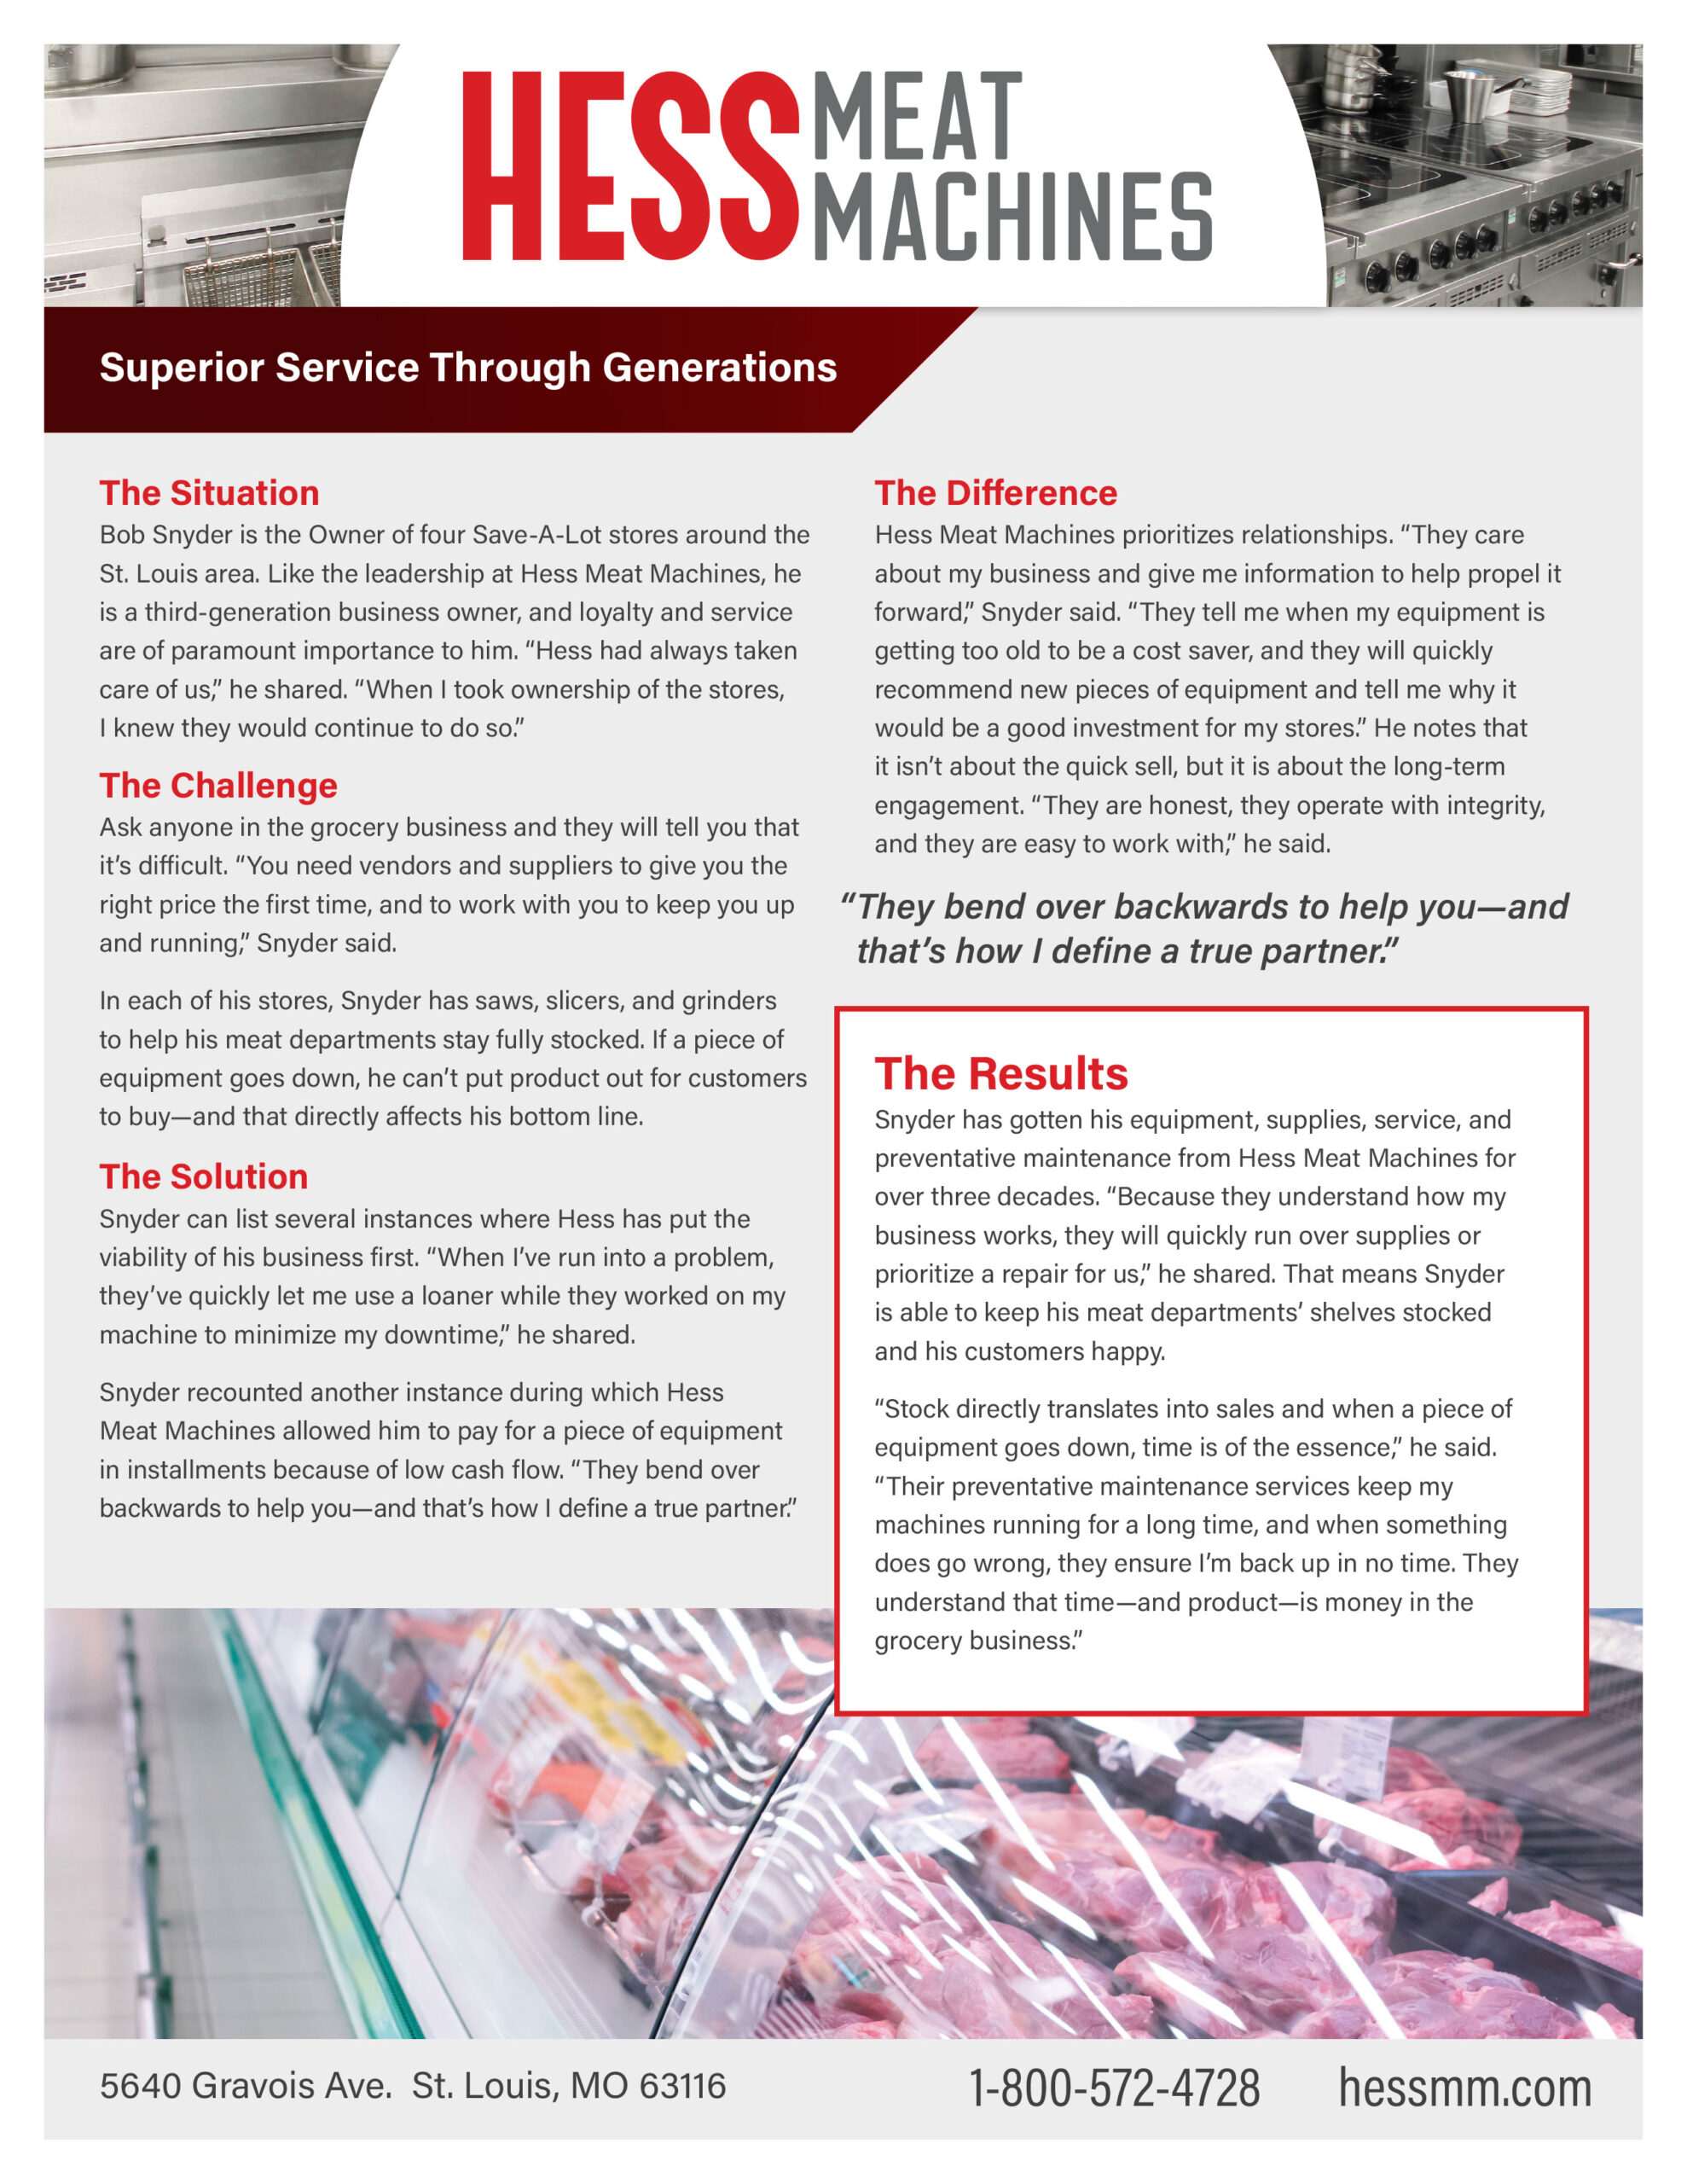 Hess Meat Machines Food Service Industry Case Study